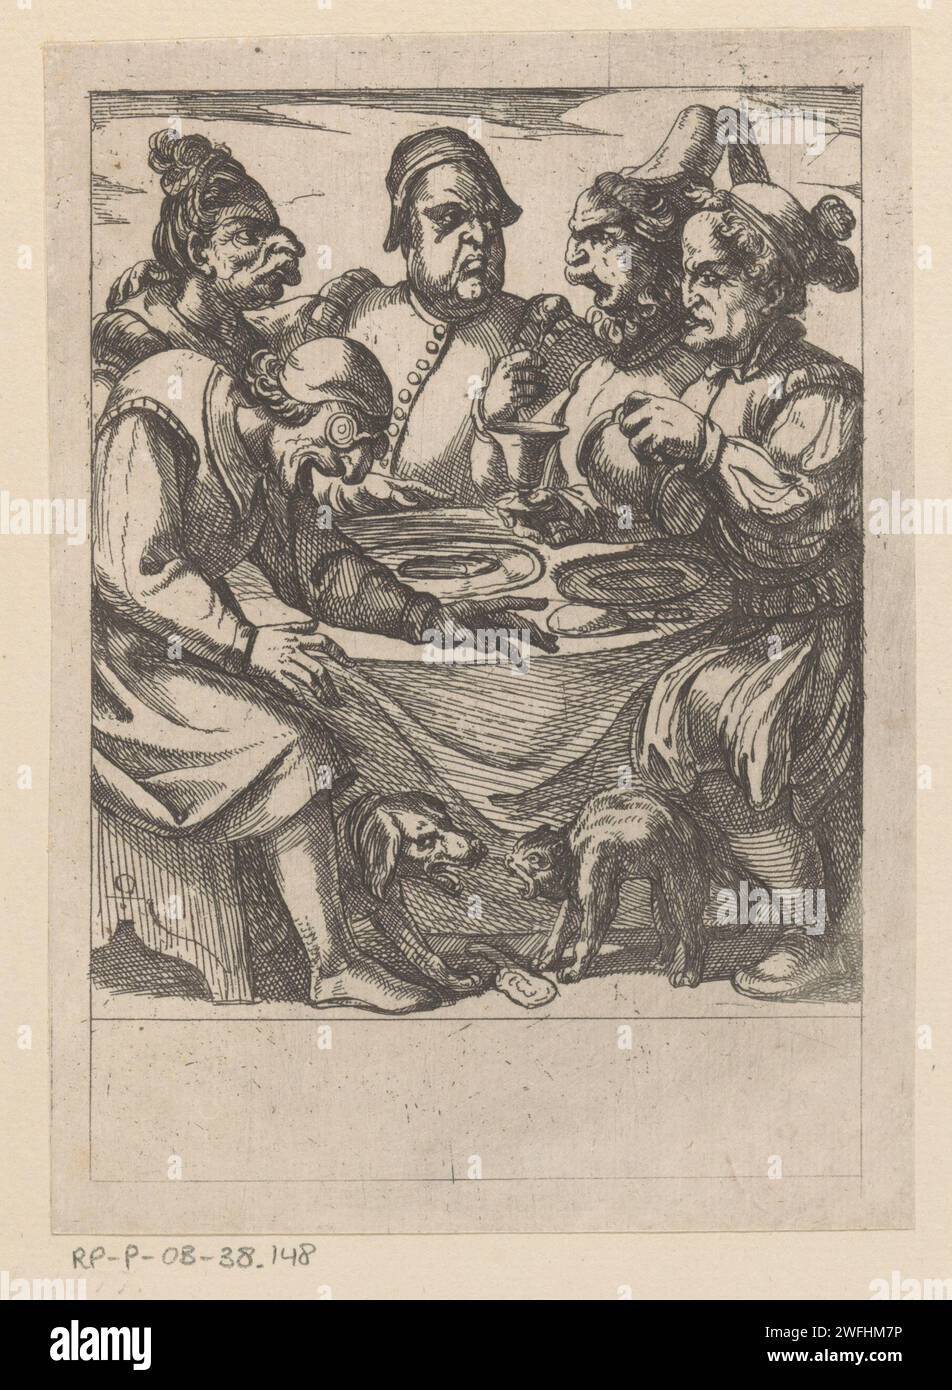 Meal with dog and cat, Antonio Tempesta, 1565 - 1630 print Three grotesque men and two ugly women sit around a table and have a meal. In the foreground a fighting dog and cat. Italy paper etching cat. dog. (family) meal. caricatures (human types) Stock Photo